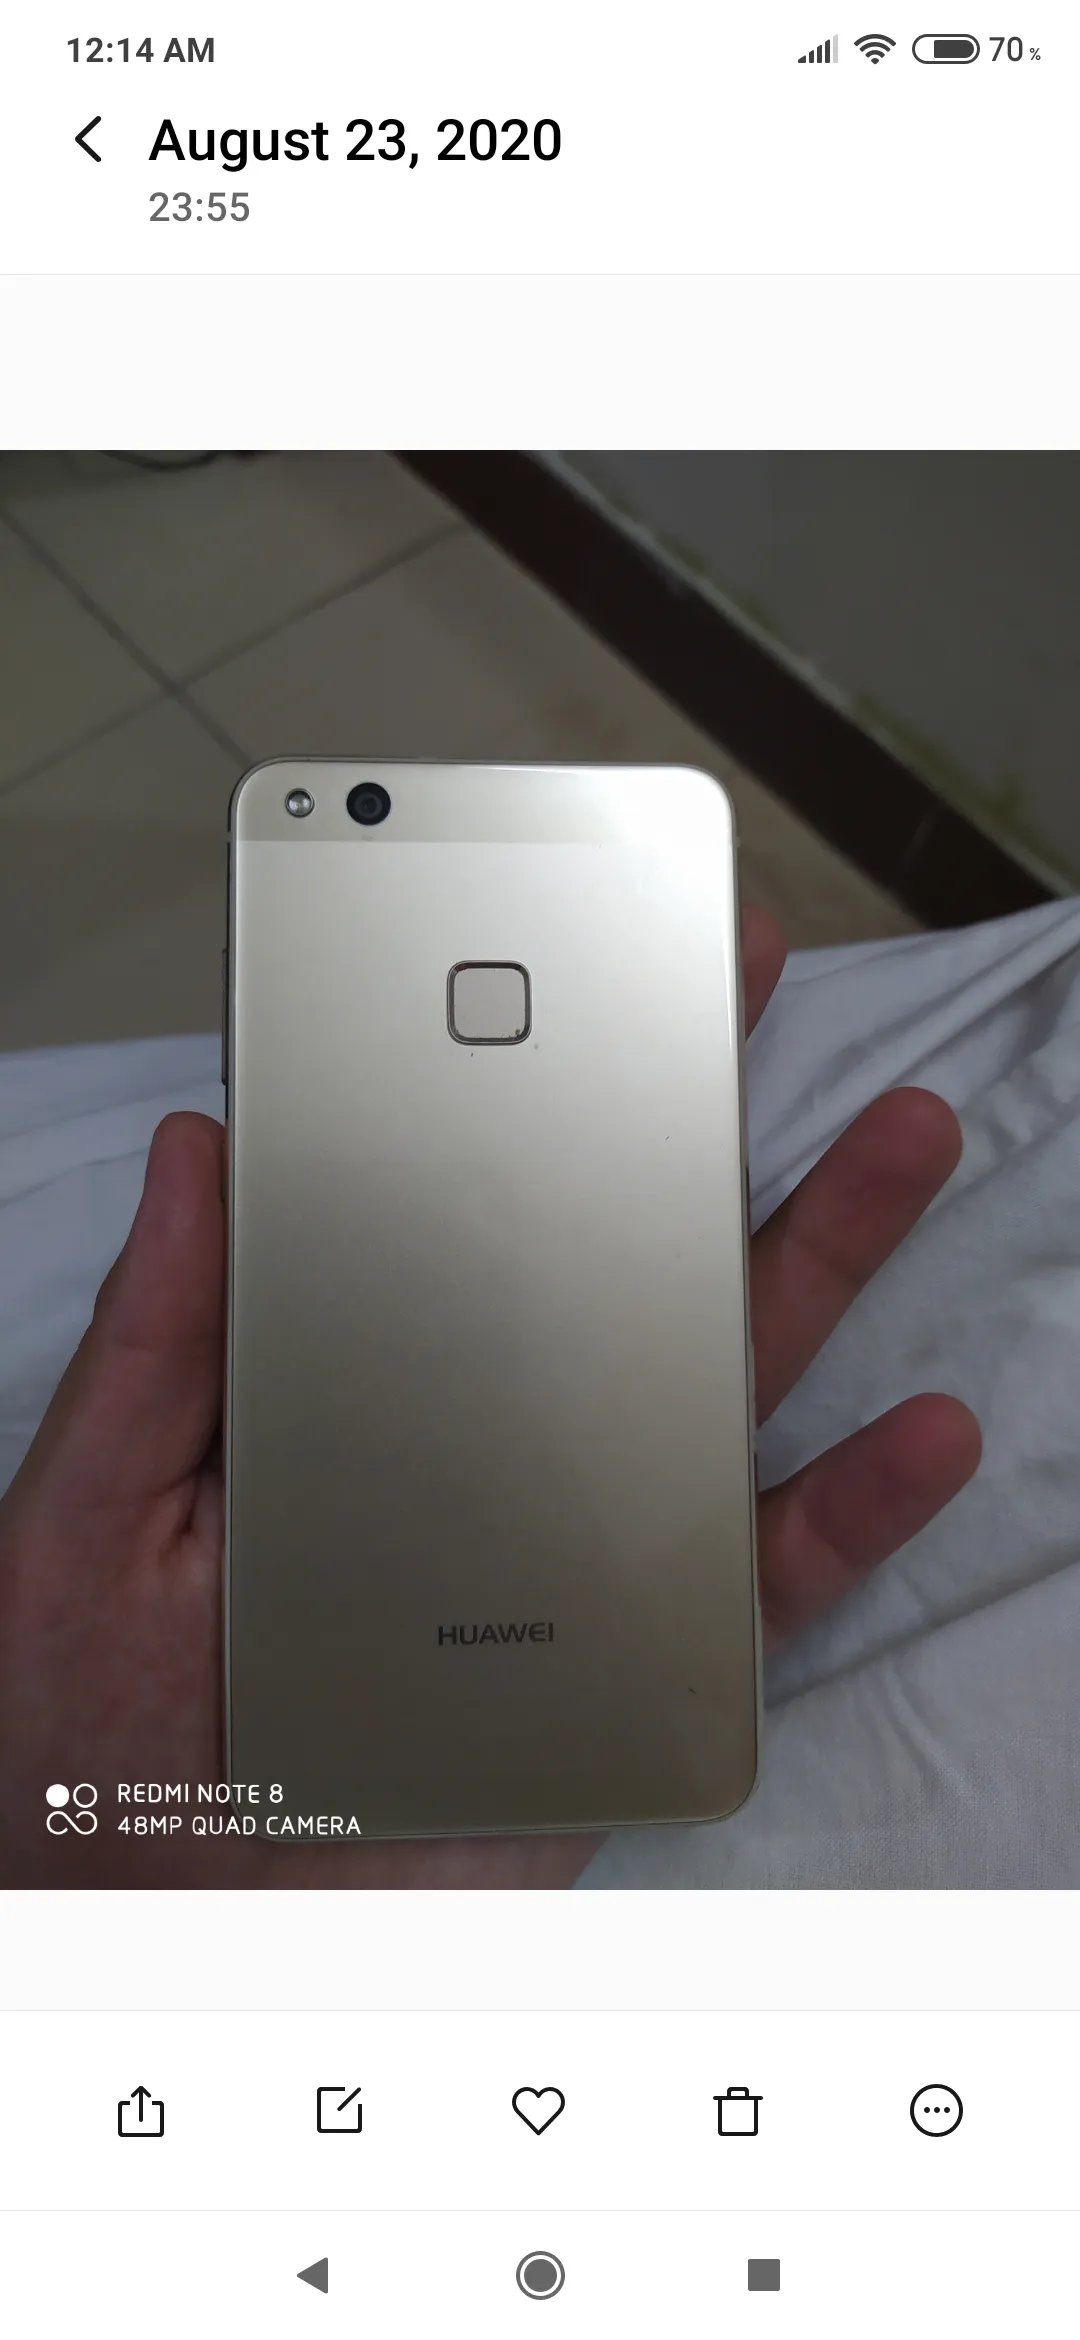 Huawei p10 lite available for sale in excellent condition in rose gold color - photo 2